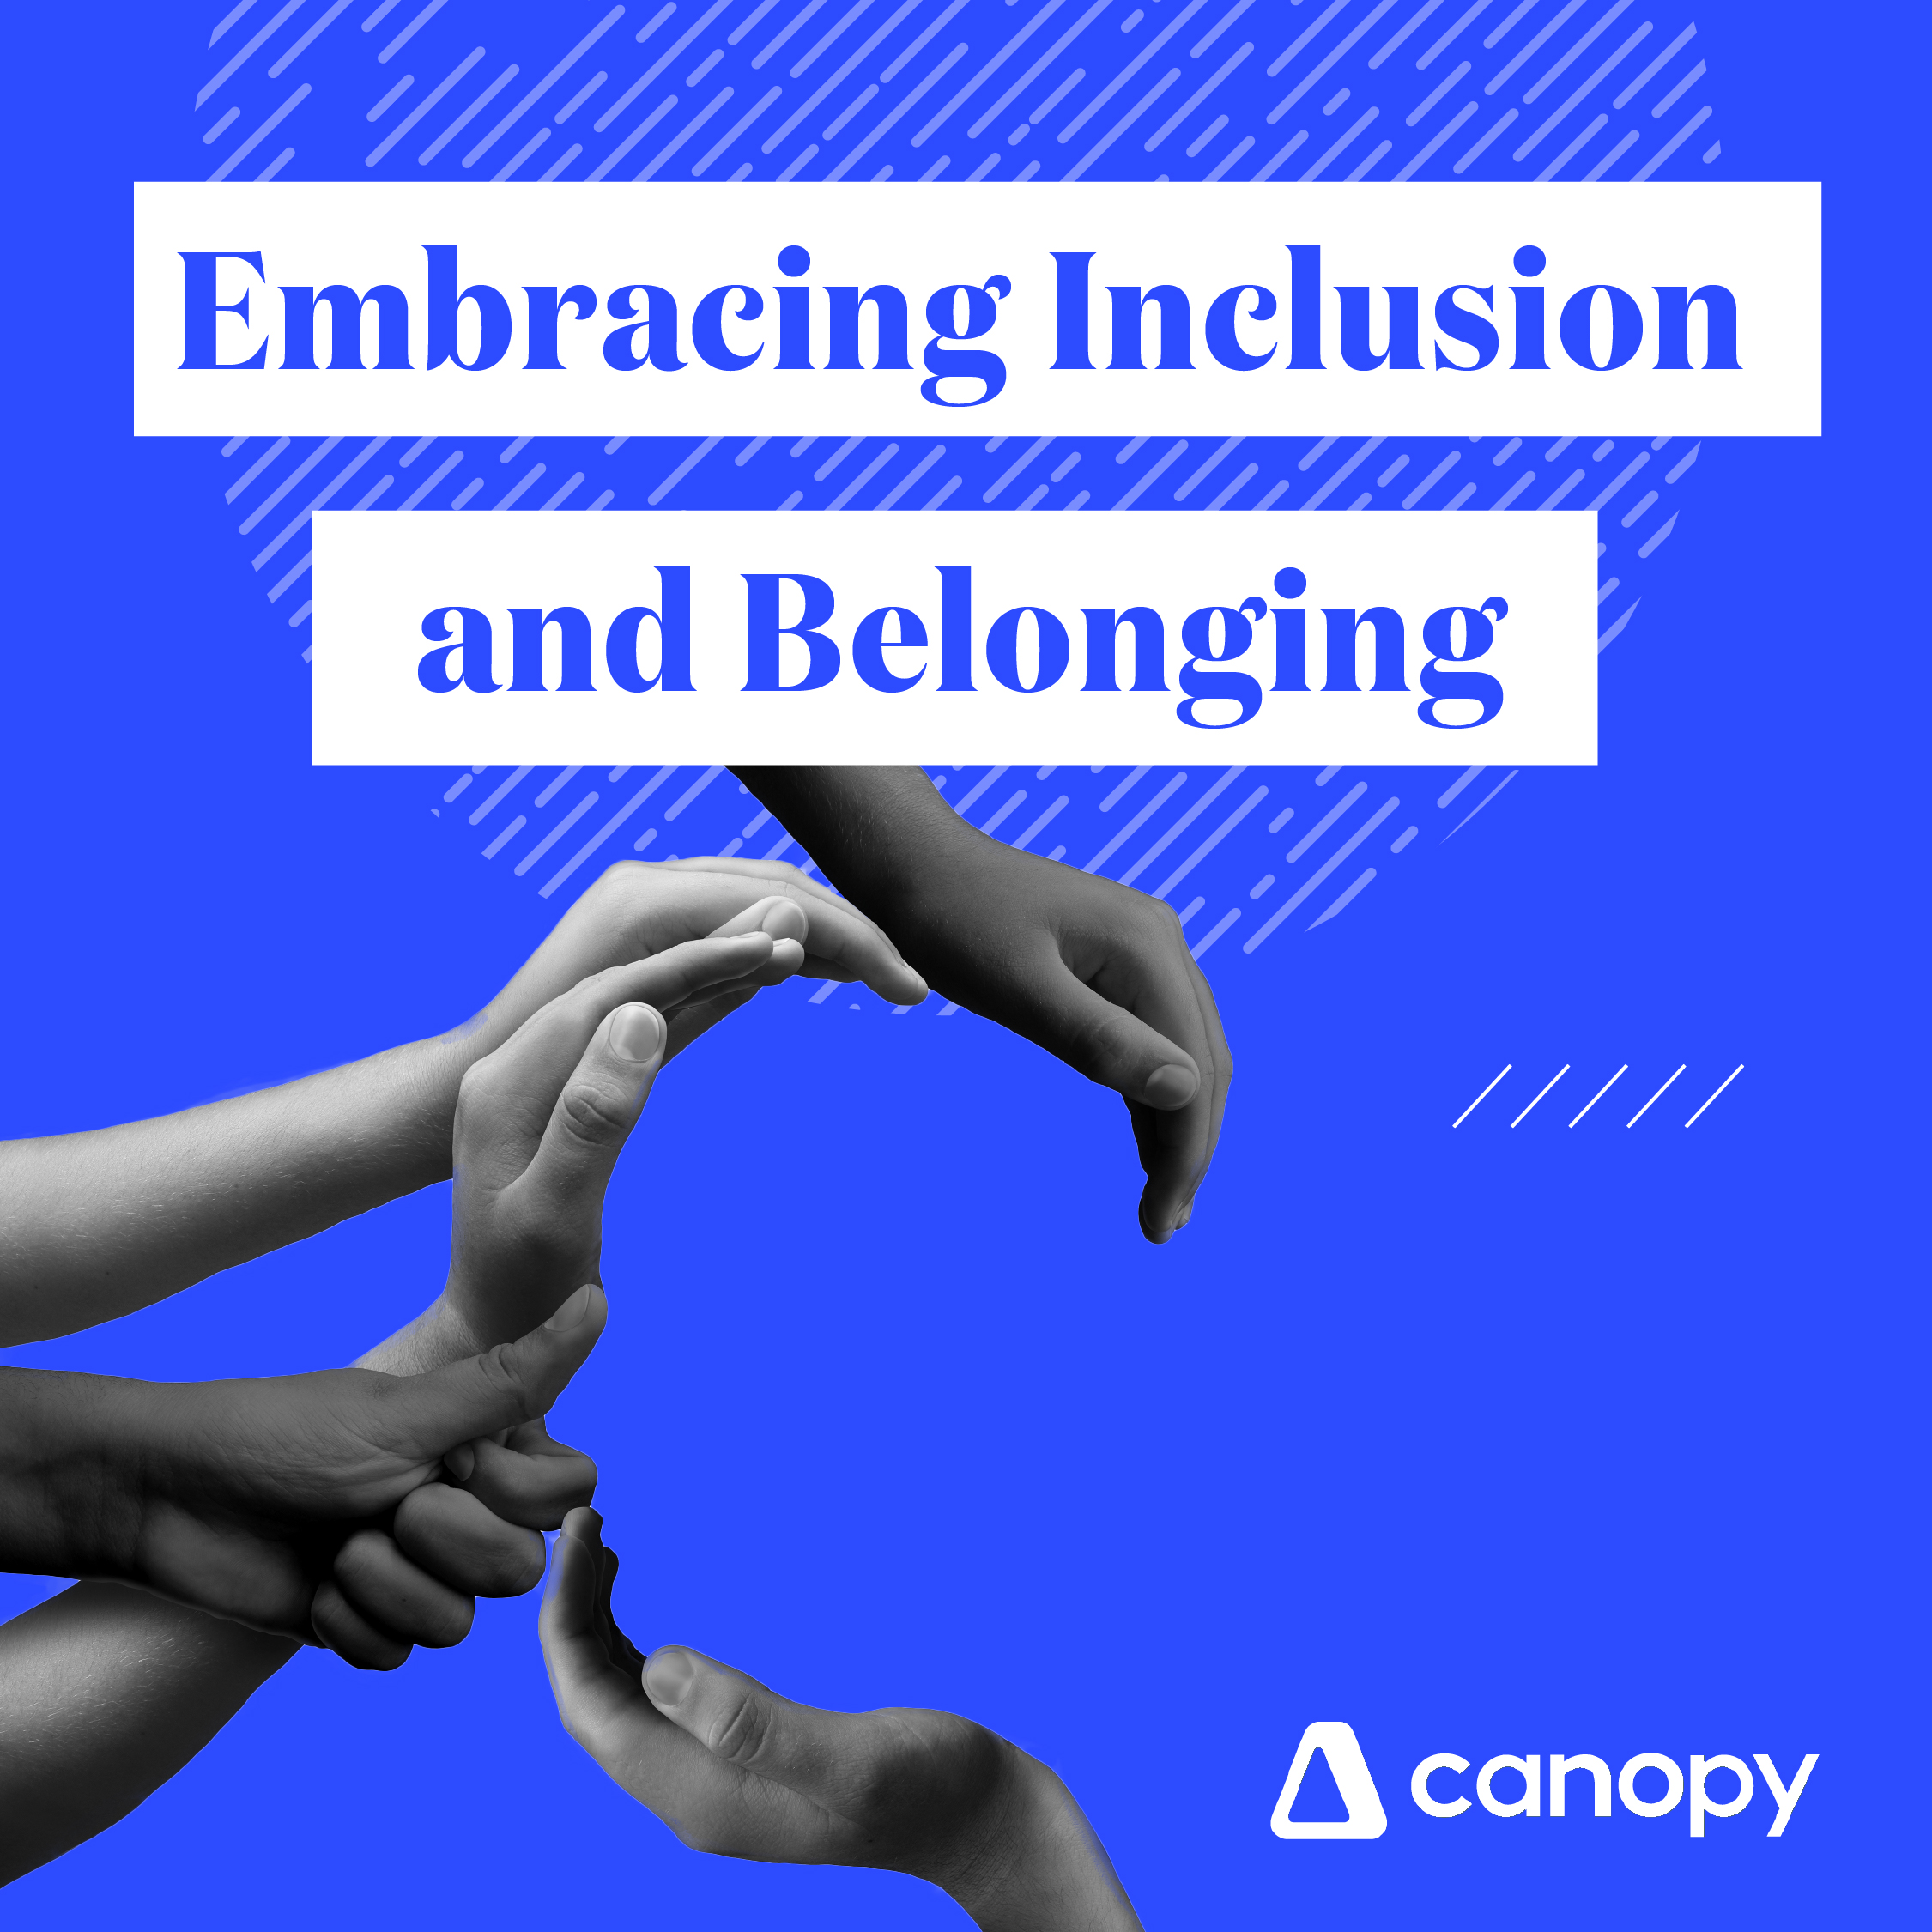 Embracing Inclusion and Belonging: Keys to Longevity and Relevance